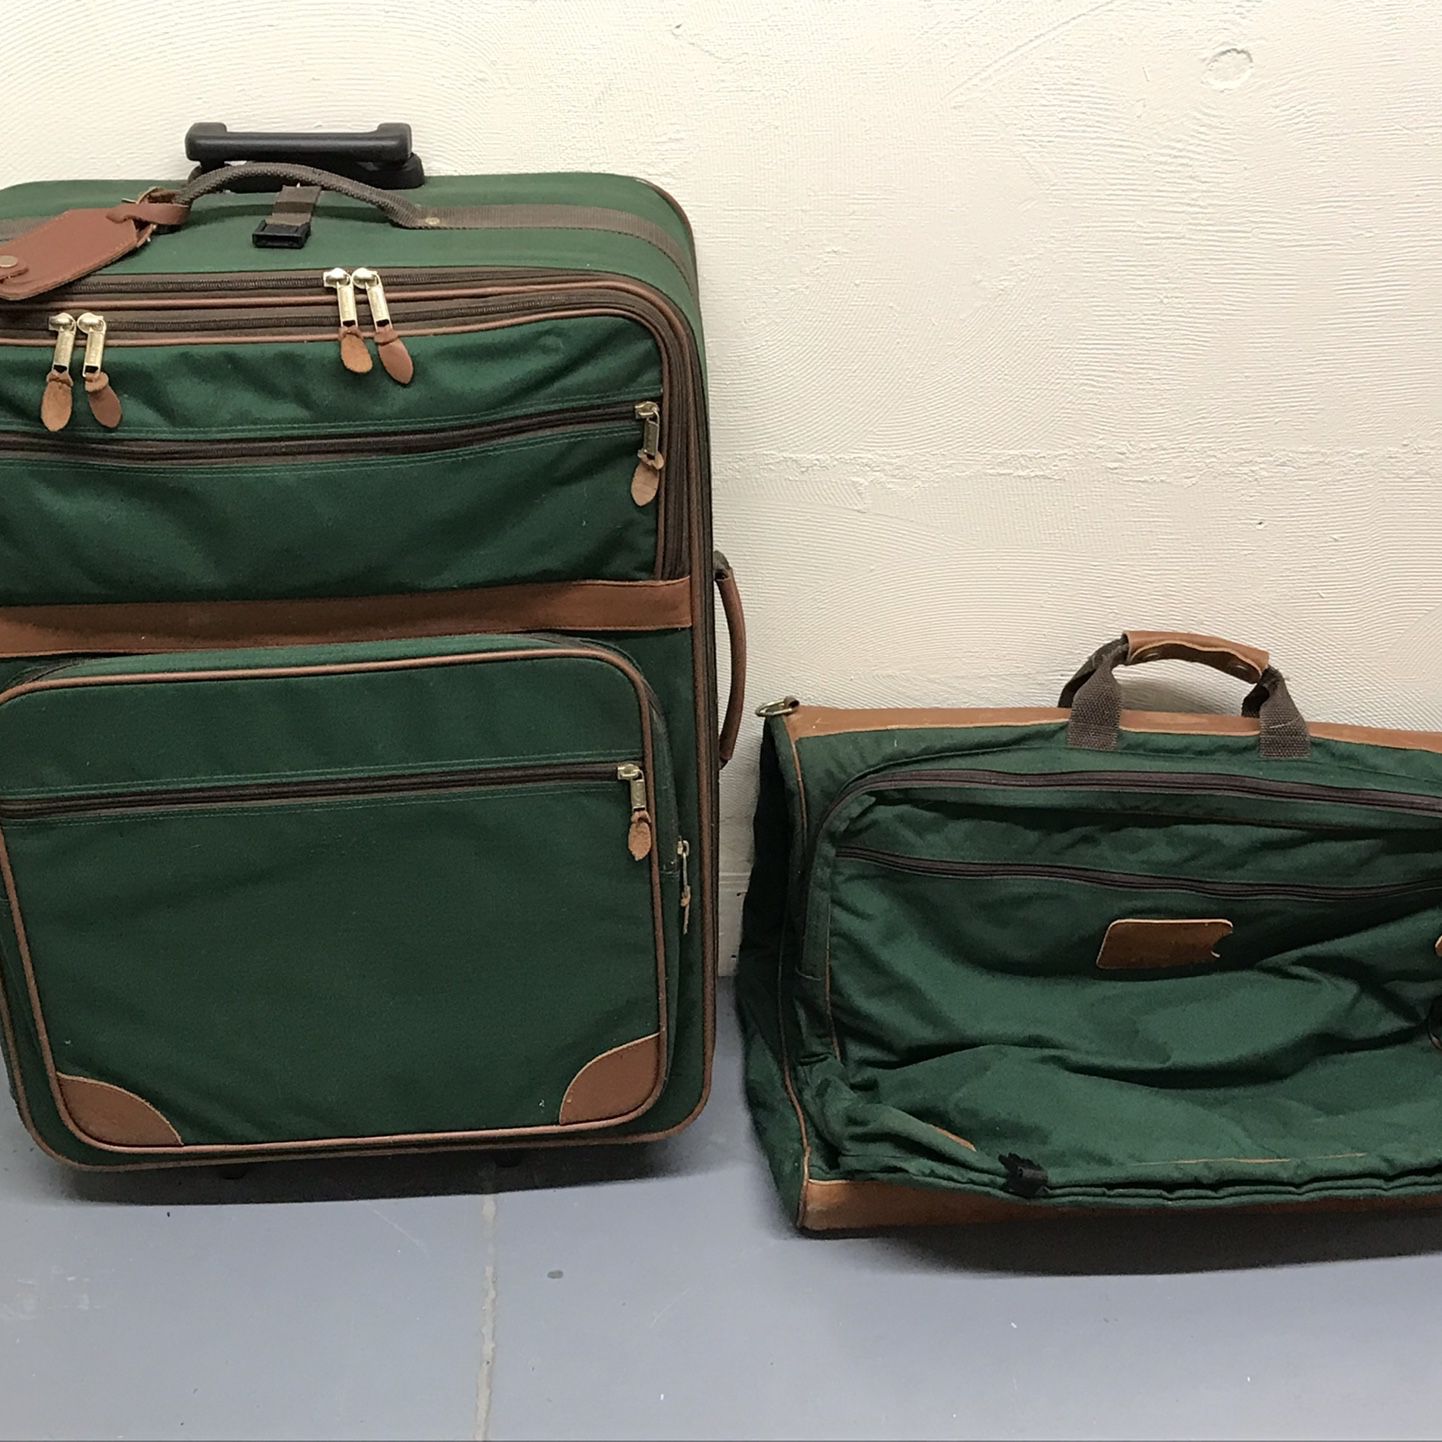 Travel Hanging Garment Bag for Sale in Alhambra, CA - OfferUp